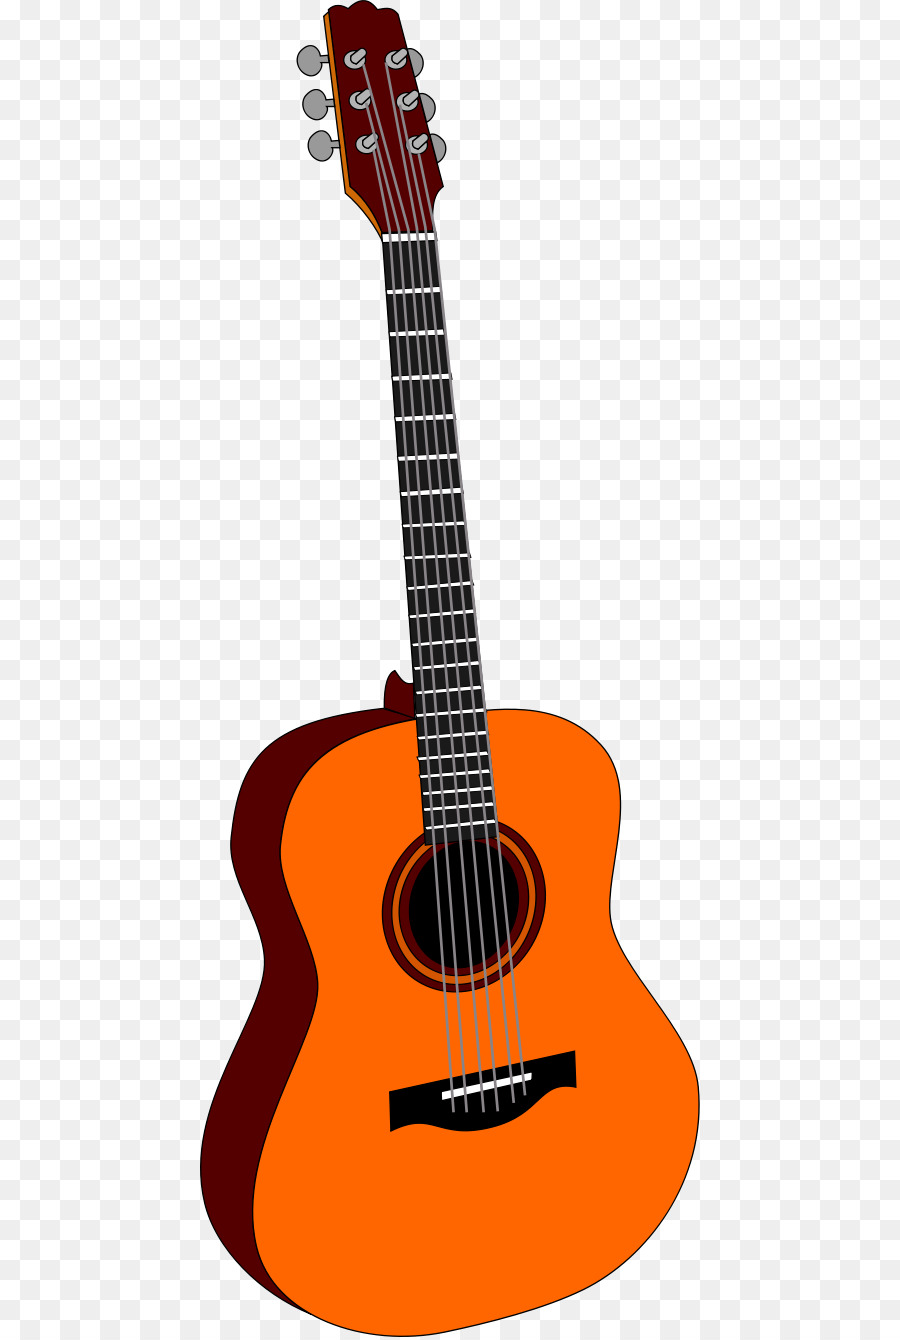 Ukulele Acoustic guitar Classical guitar Clip art - Pictures Of A Guitar png download - 500*1337 - Free Transparent  png Download.